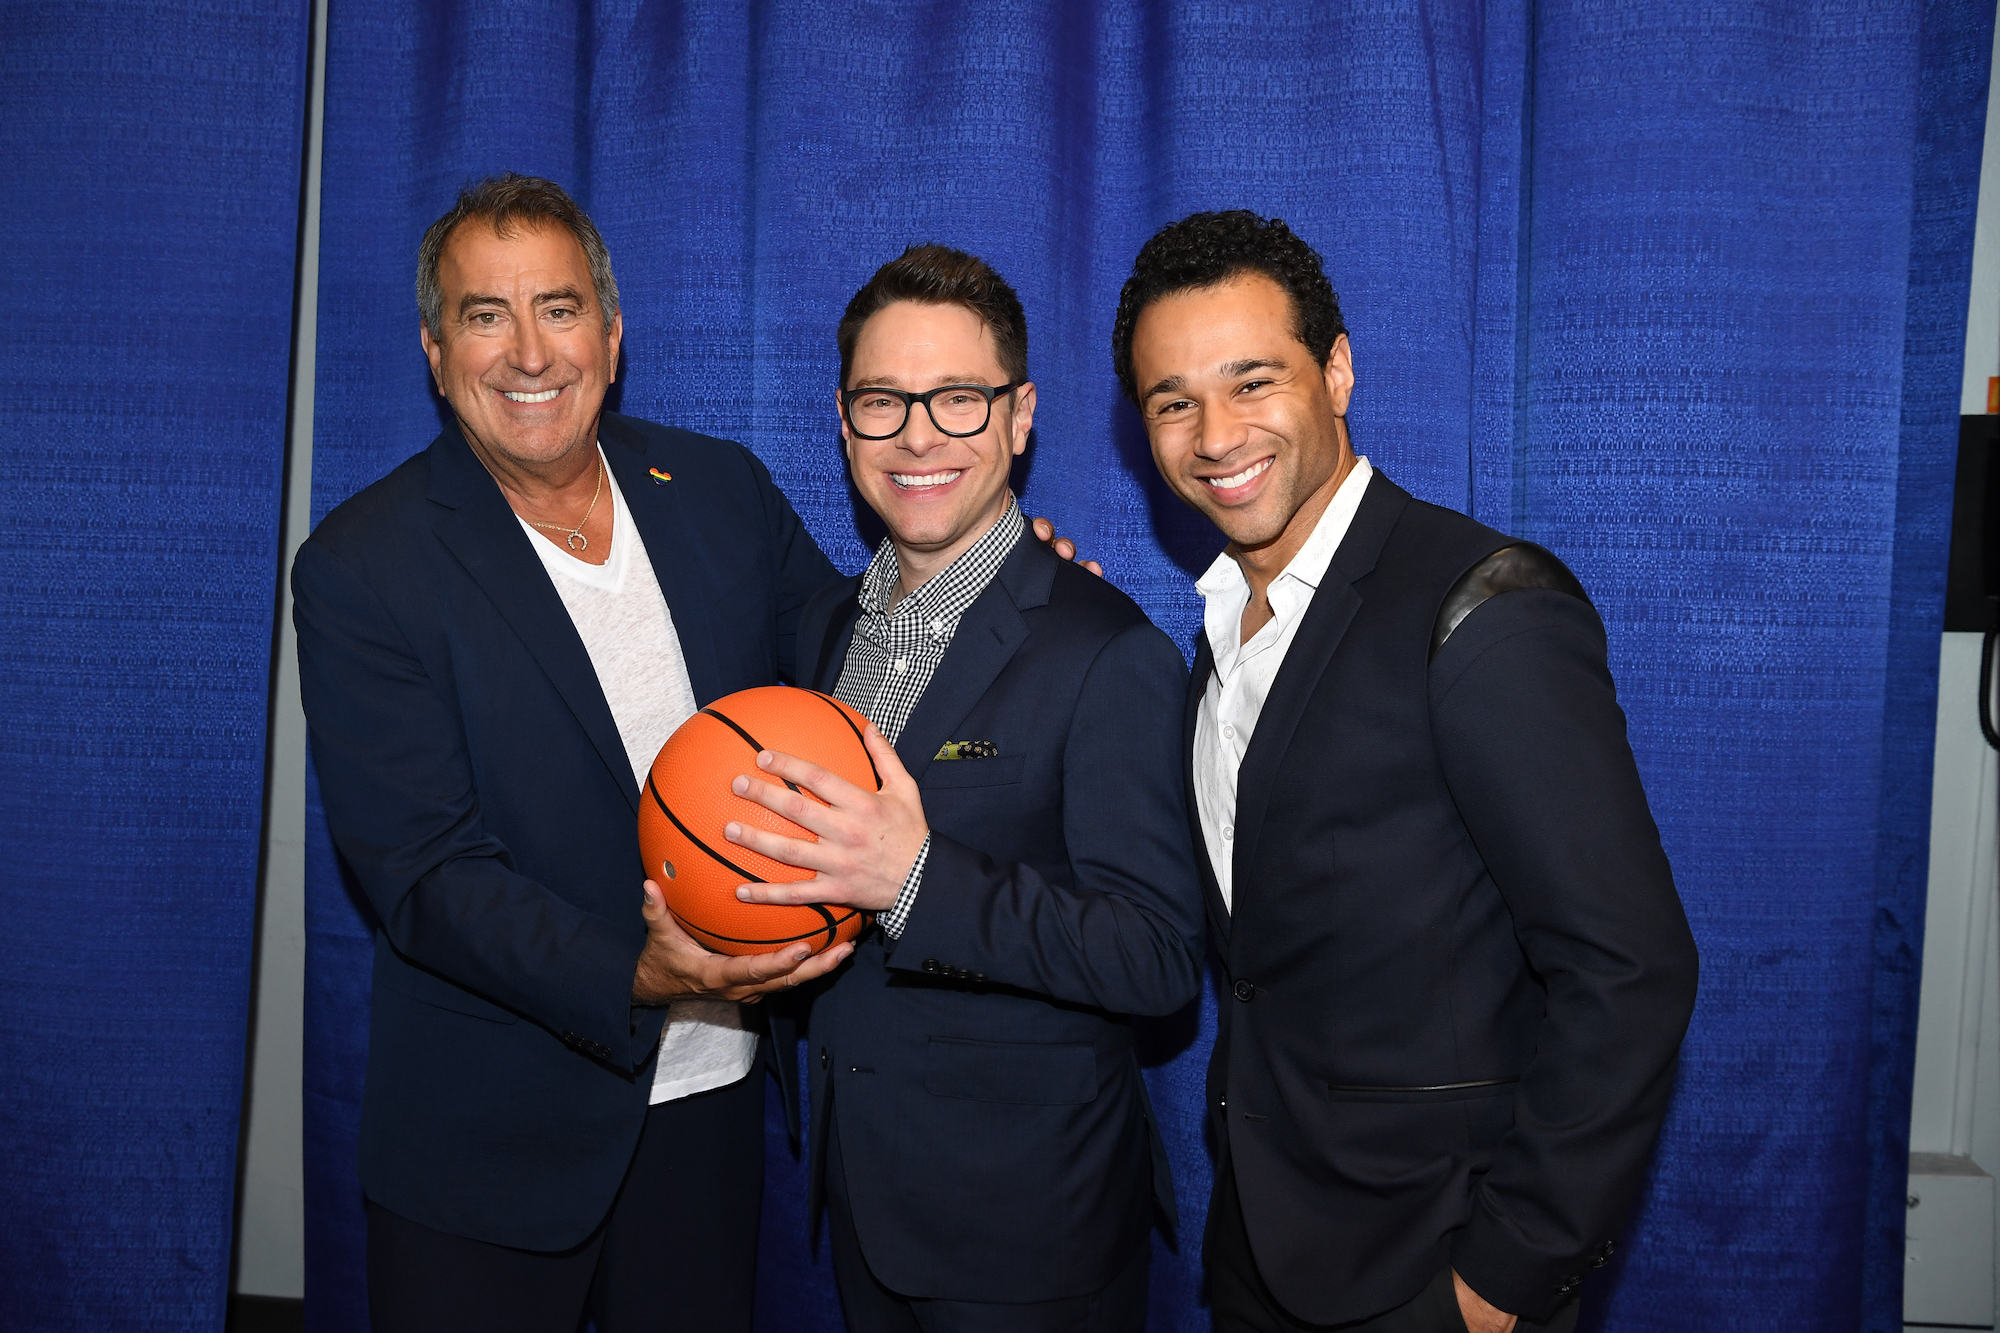 Kenny Ortega (creator and director of 'High School Musical') with Tim Federle (the showrunner for HSMTMTS) and Corbin Bleu at the D23 EXPO 2019.